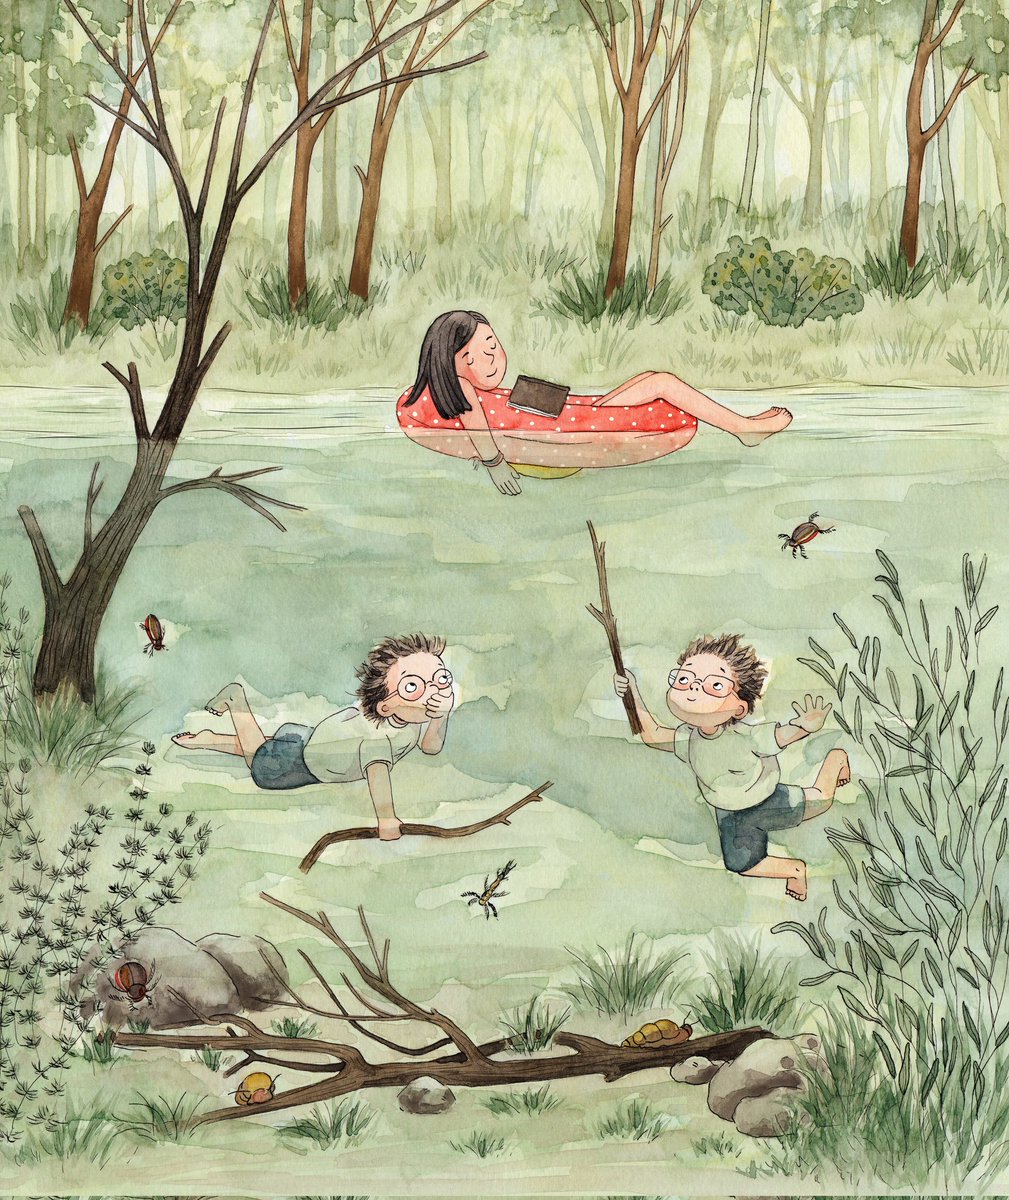 Summer at the lake with the little brothers. #kidlitartist #picturebook #picturebookmaker